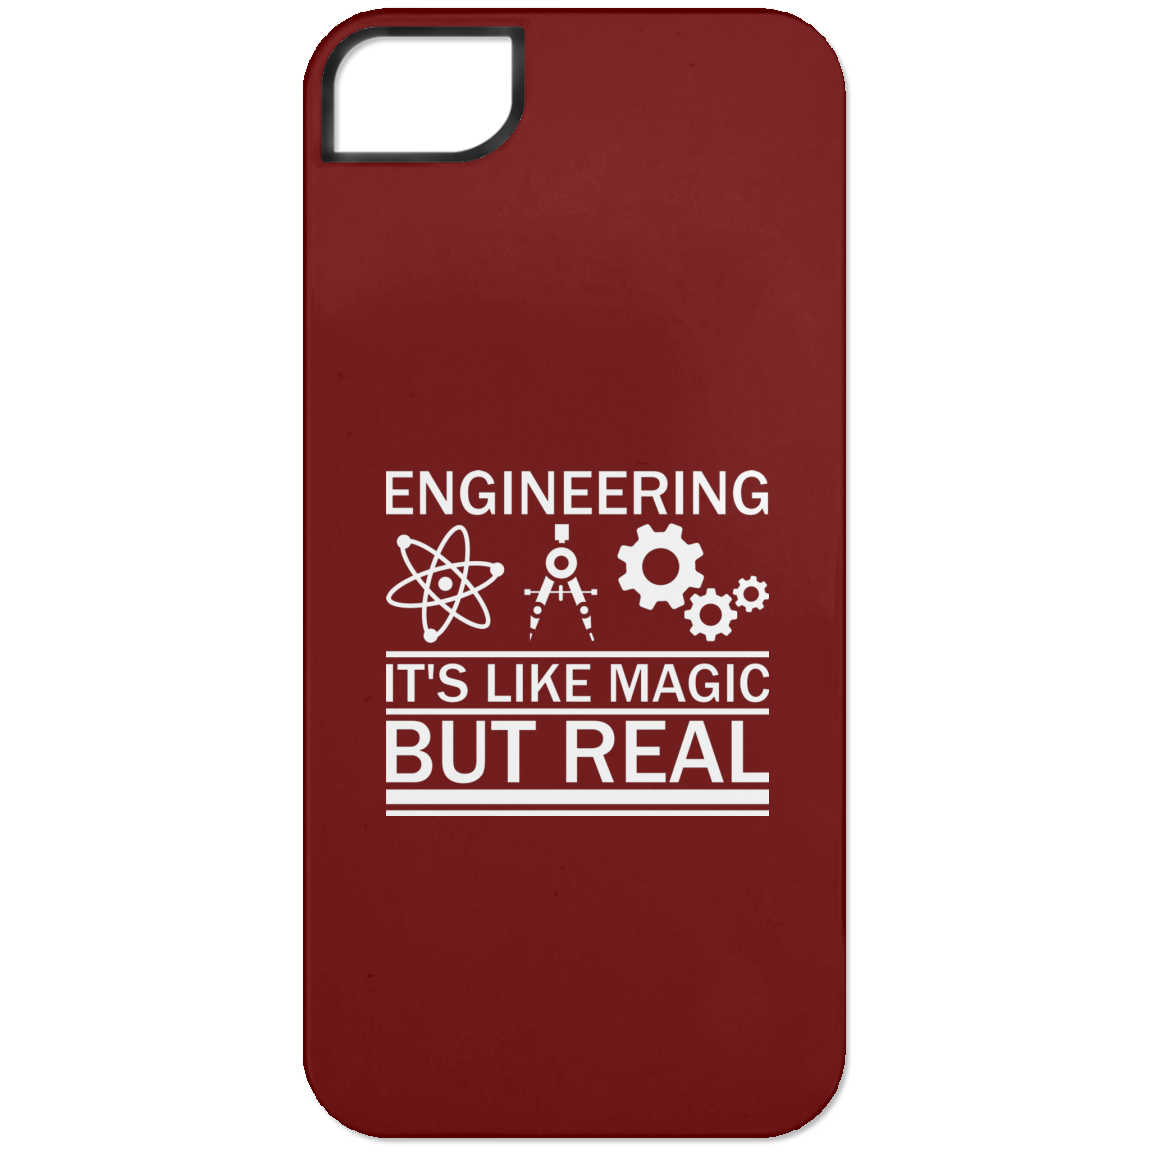 Engineering - It's Like Magic But Real (Phone Case)